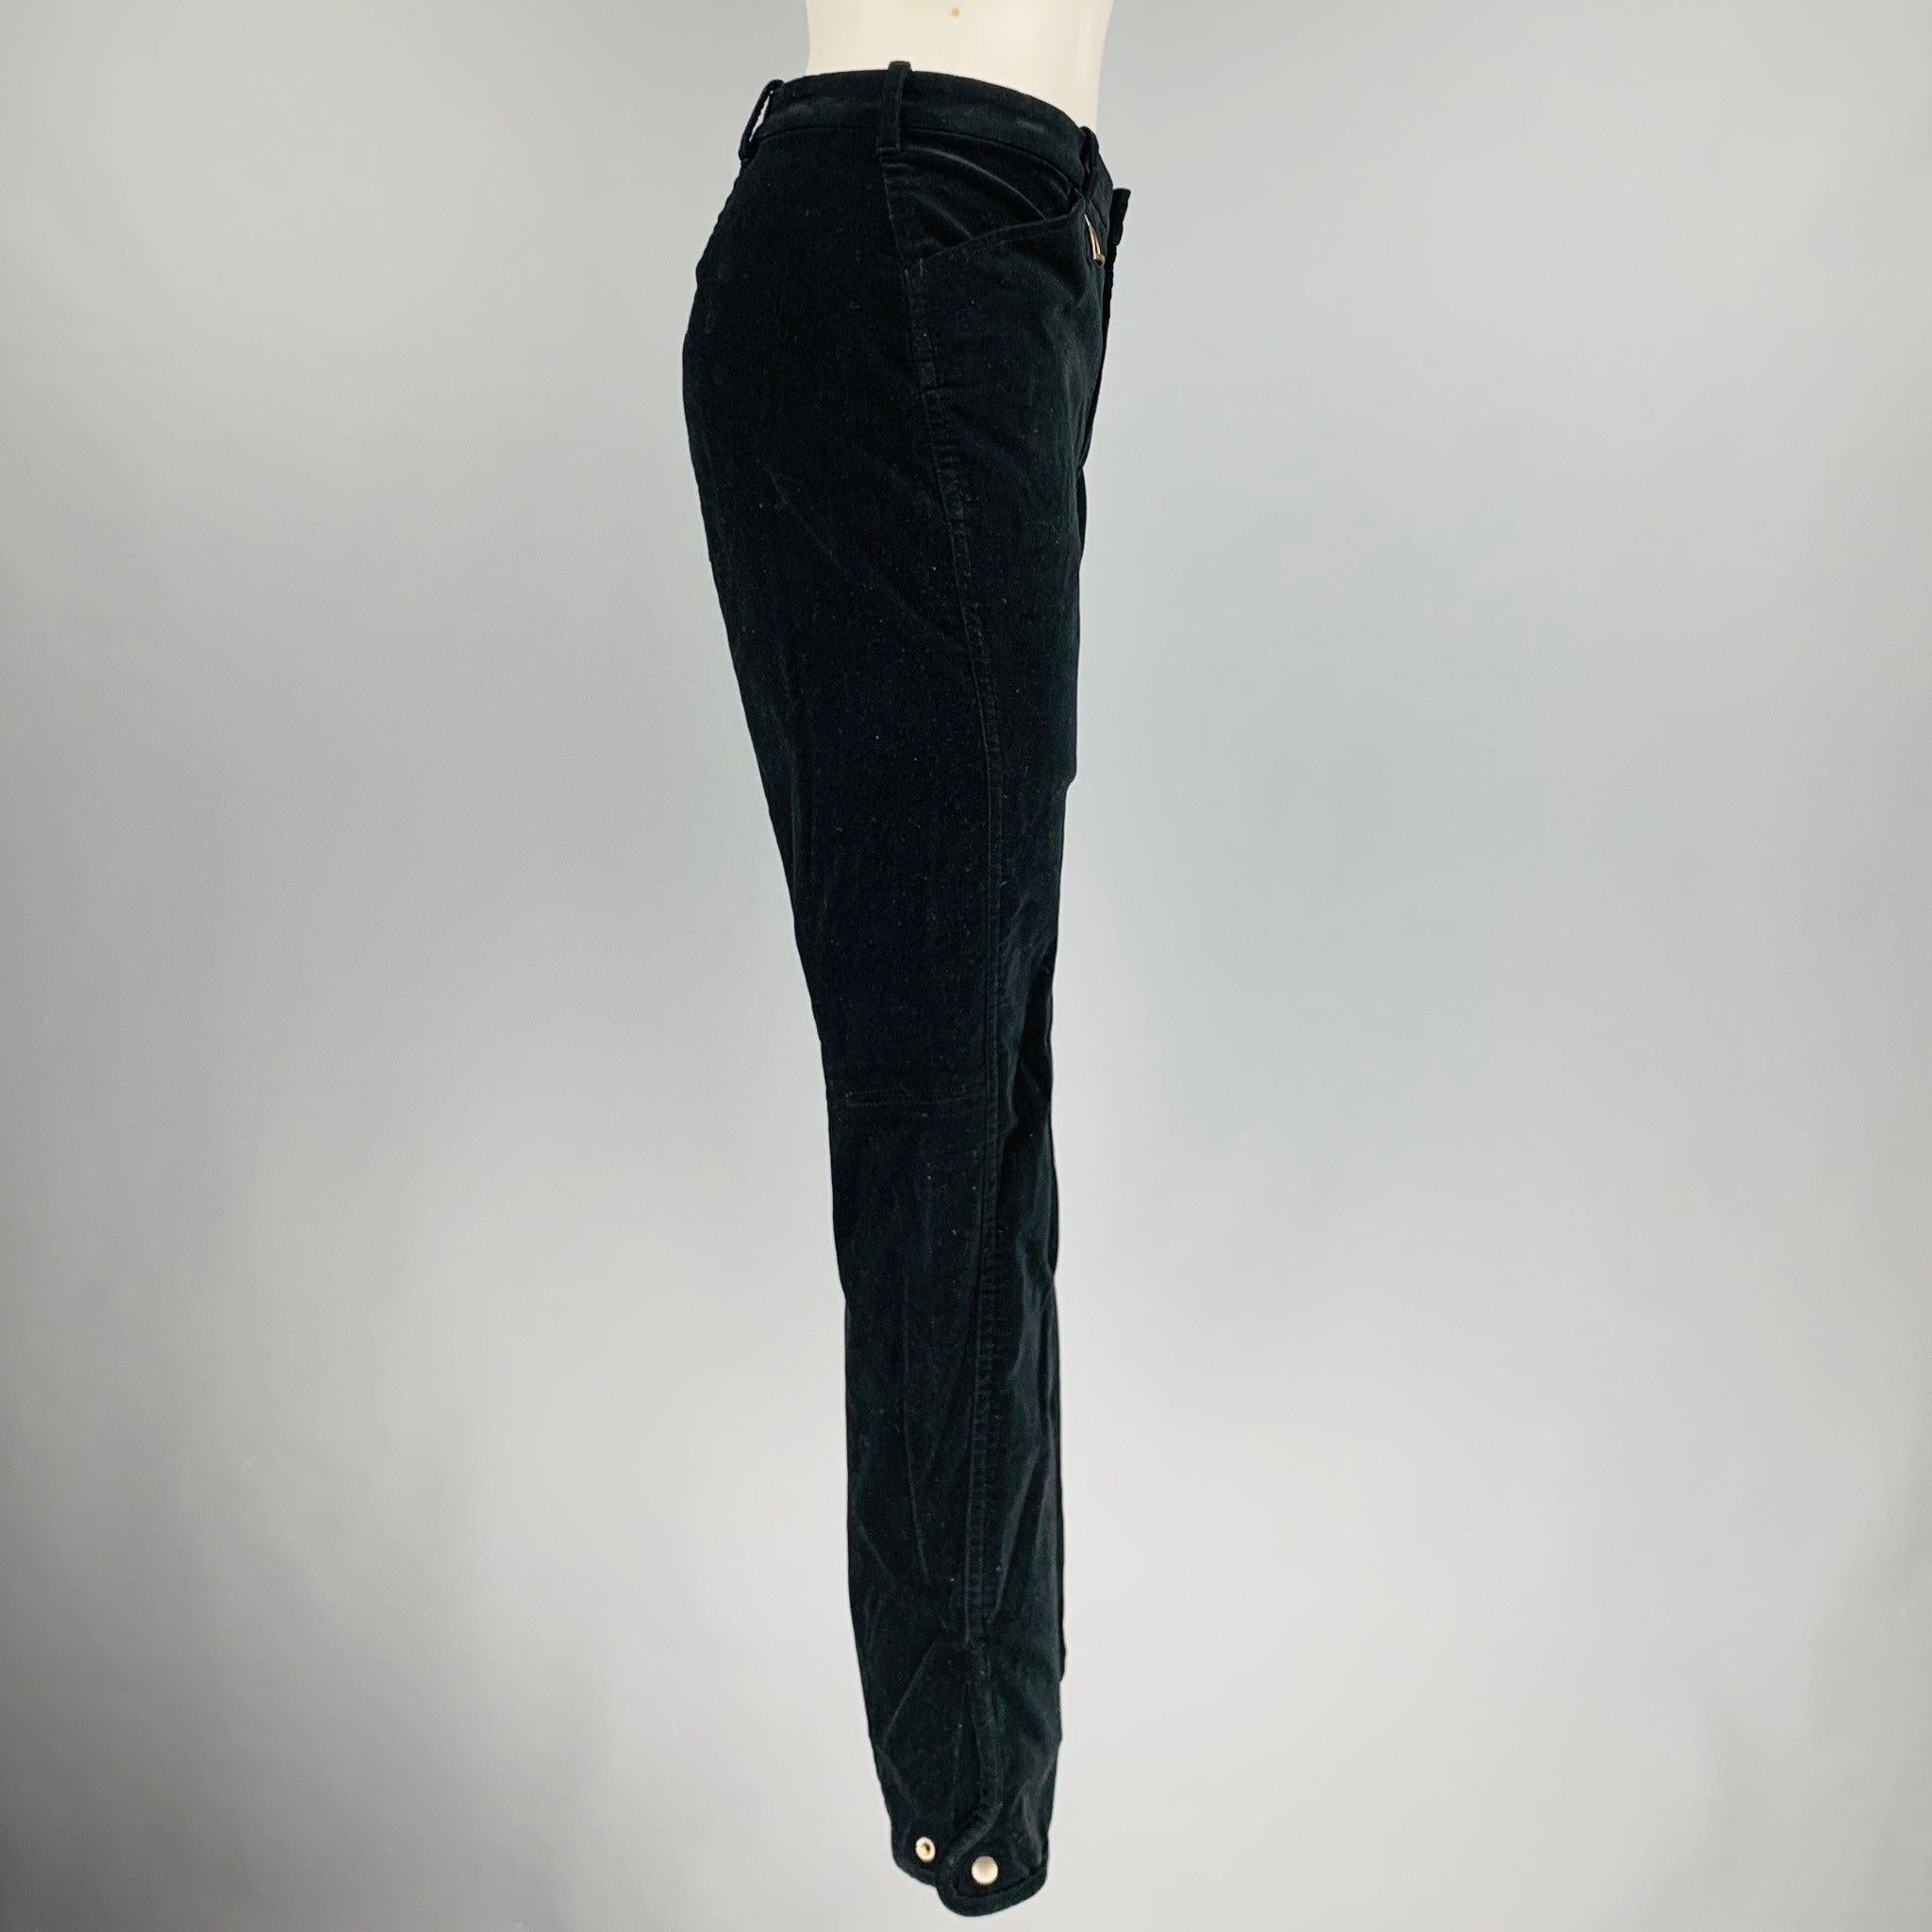 RALPH LAUREN BLUE LABEL casual pants comes in a black velvet cotton and elastane featuring black velvet patch details, slim fit, low rise, and a zip fly closure. Made in USA.Excellent Pre-Owned Condition. 

Marked:   8 

Measurements: 
  Waist: 32